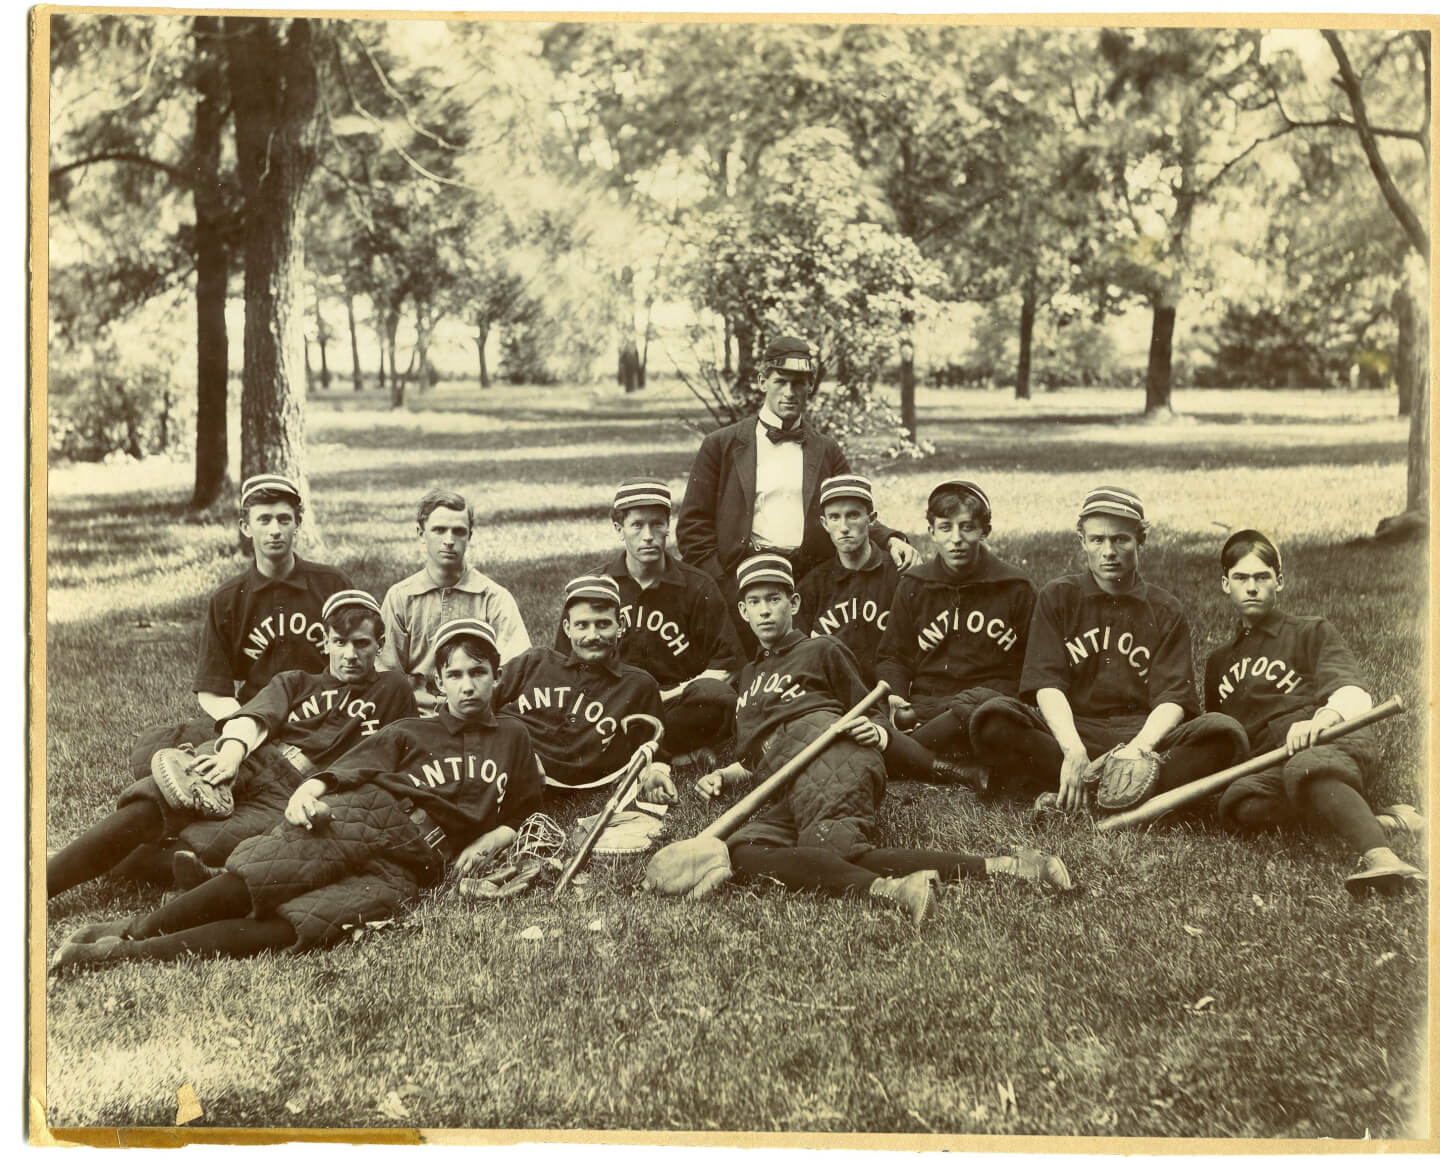 Derivation Dingy købmand Rematch: 1869 Red Stockings vs. Antioch Nine - Antioch College